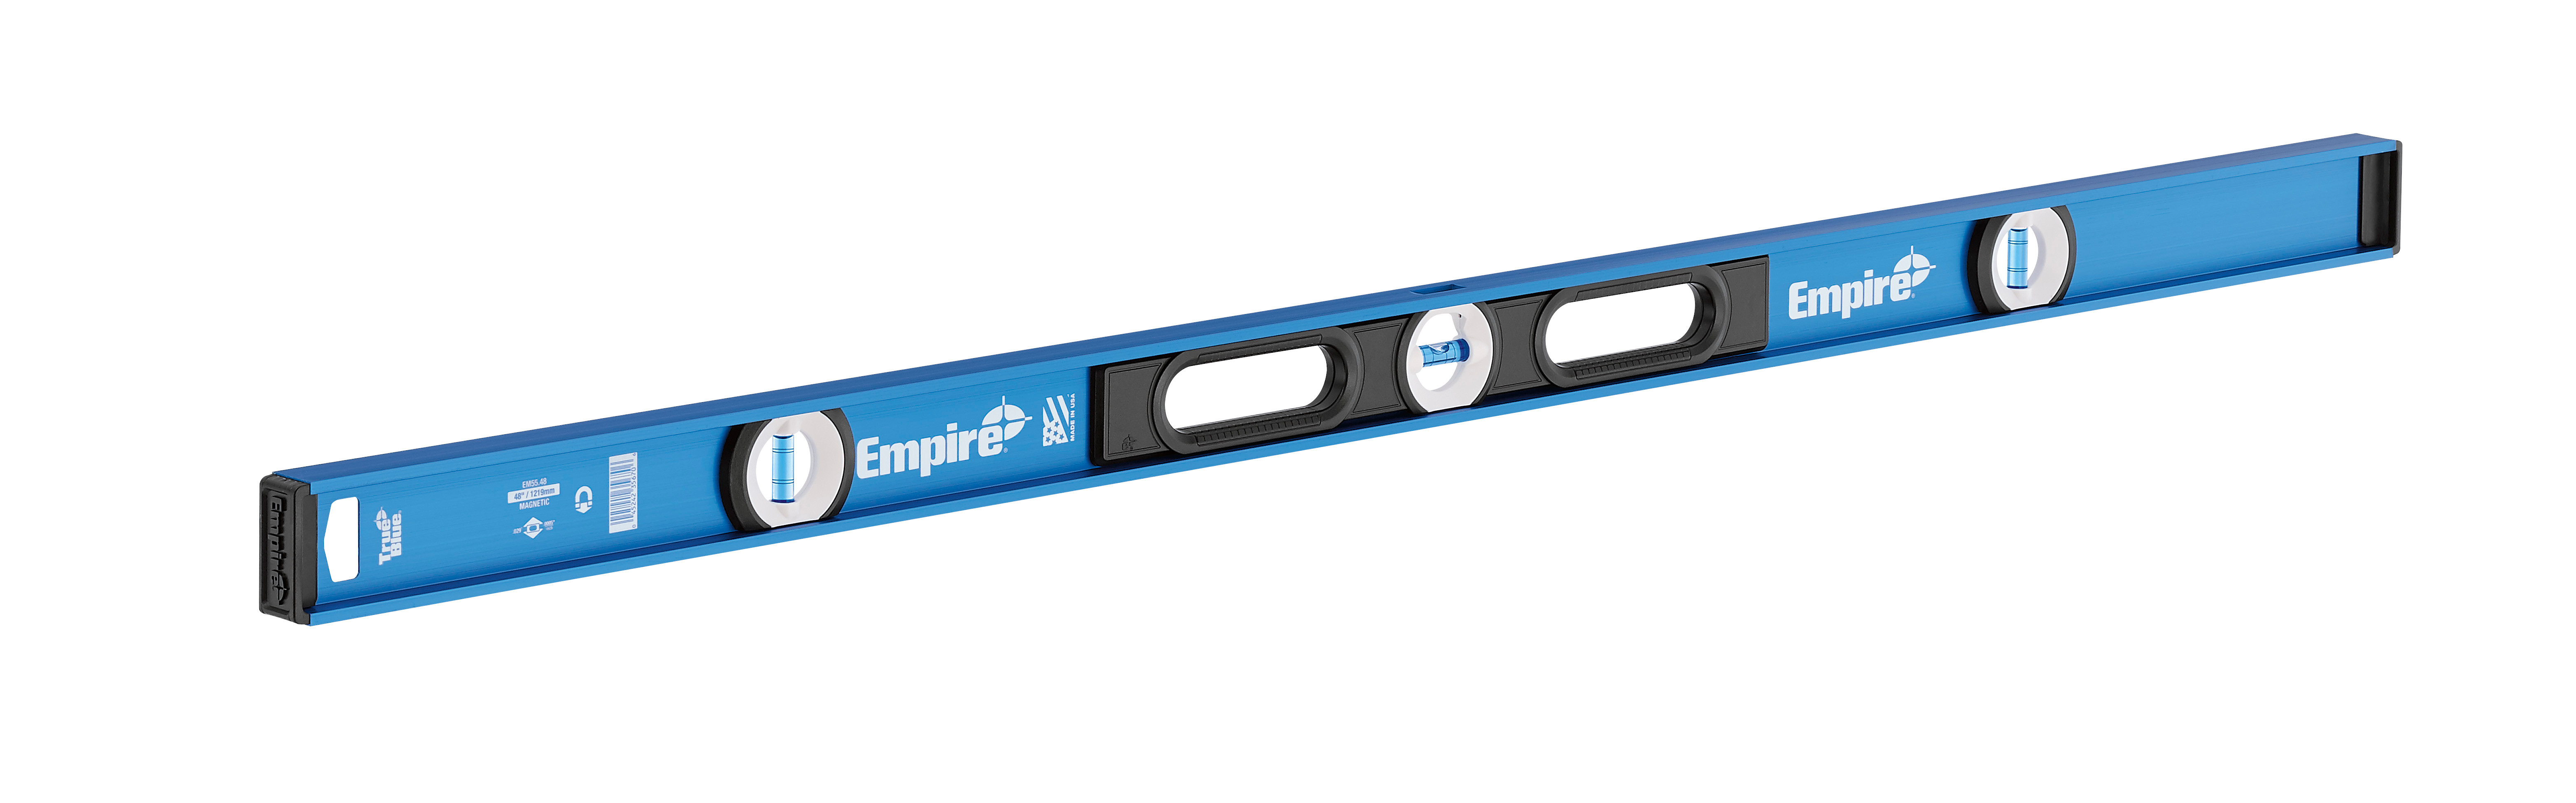 As the dominant market leader in levels, squares, and marking products Empire is committed to delivering innovative solutions designed for our end users and built for the modern jobsite. The Empire True Blue® I-Beam level offers superior performance in all key areas of user needs including accuracy, durability & readability. Empire's patented e-Band™ vials are accurate to within .0005 in. per in. in all plumb and level working positions. The all metal, anodized frame offers ergonomic grip zones and a top read window without sacrificing frame strength and durability. High contrast vial surrounds provide maximum visibility in all light conditions and feature high impact acrylic vials for long-life protection and accuracy. Empire's True Blue® I-Beam levels are designed for the jobsite and are backed with a Limited Lifetime Warranty. Made in the USA.  Features e-Band™ vials are accurate to within 0.0005 in. per inch in all working positions. High impact acrylic vials deliver long-life accuracy and read-out. All metal anodized I-Beam frame will not rust or corrode. High contrast vial surrounds make viewing easier in all light conditions. Top read window provides clear overhead viewing. Wide, durable handles for ease of use and enhanced portability. Compact end caps are impact resistant and offer protection for long-life accuracy. Full-length magnetic edge for superior holding strength. Made in USA. Limited Lifetime Warranty 56706